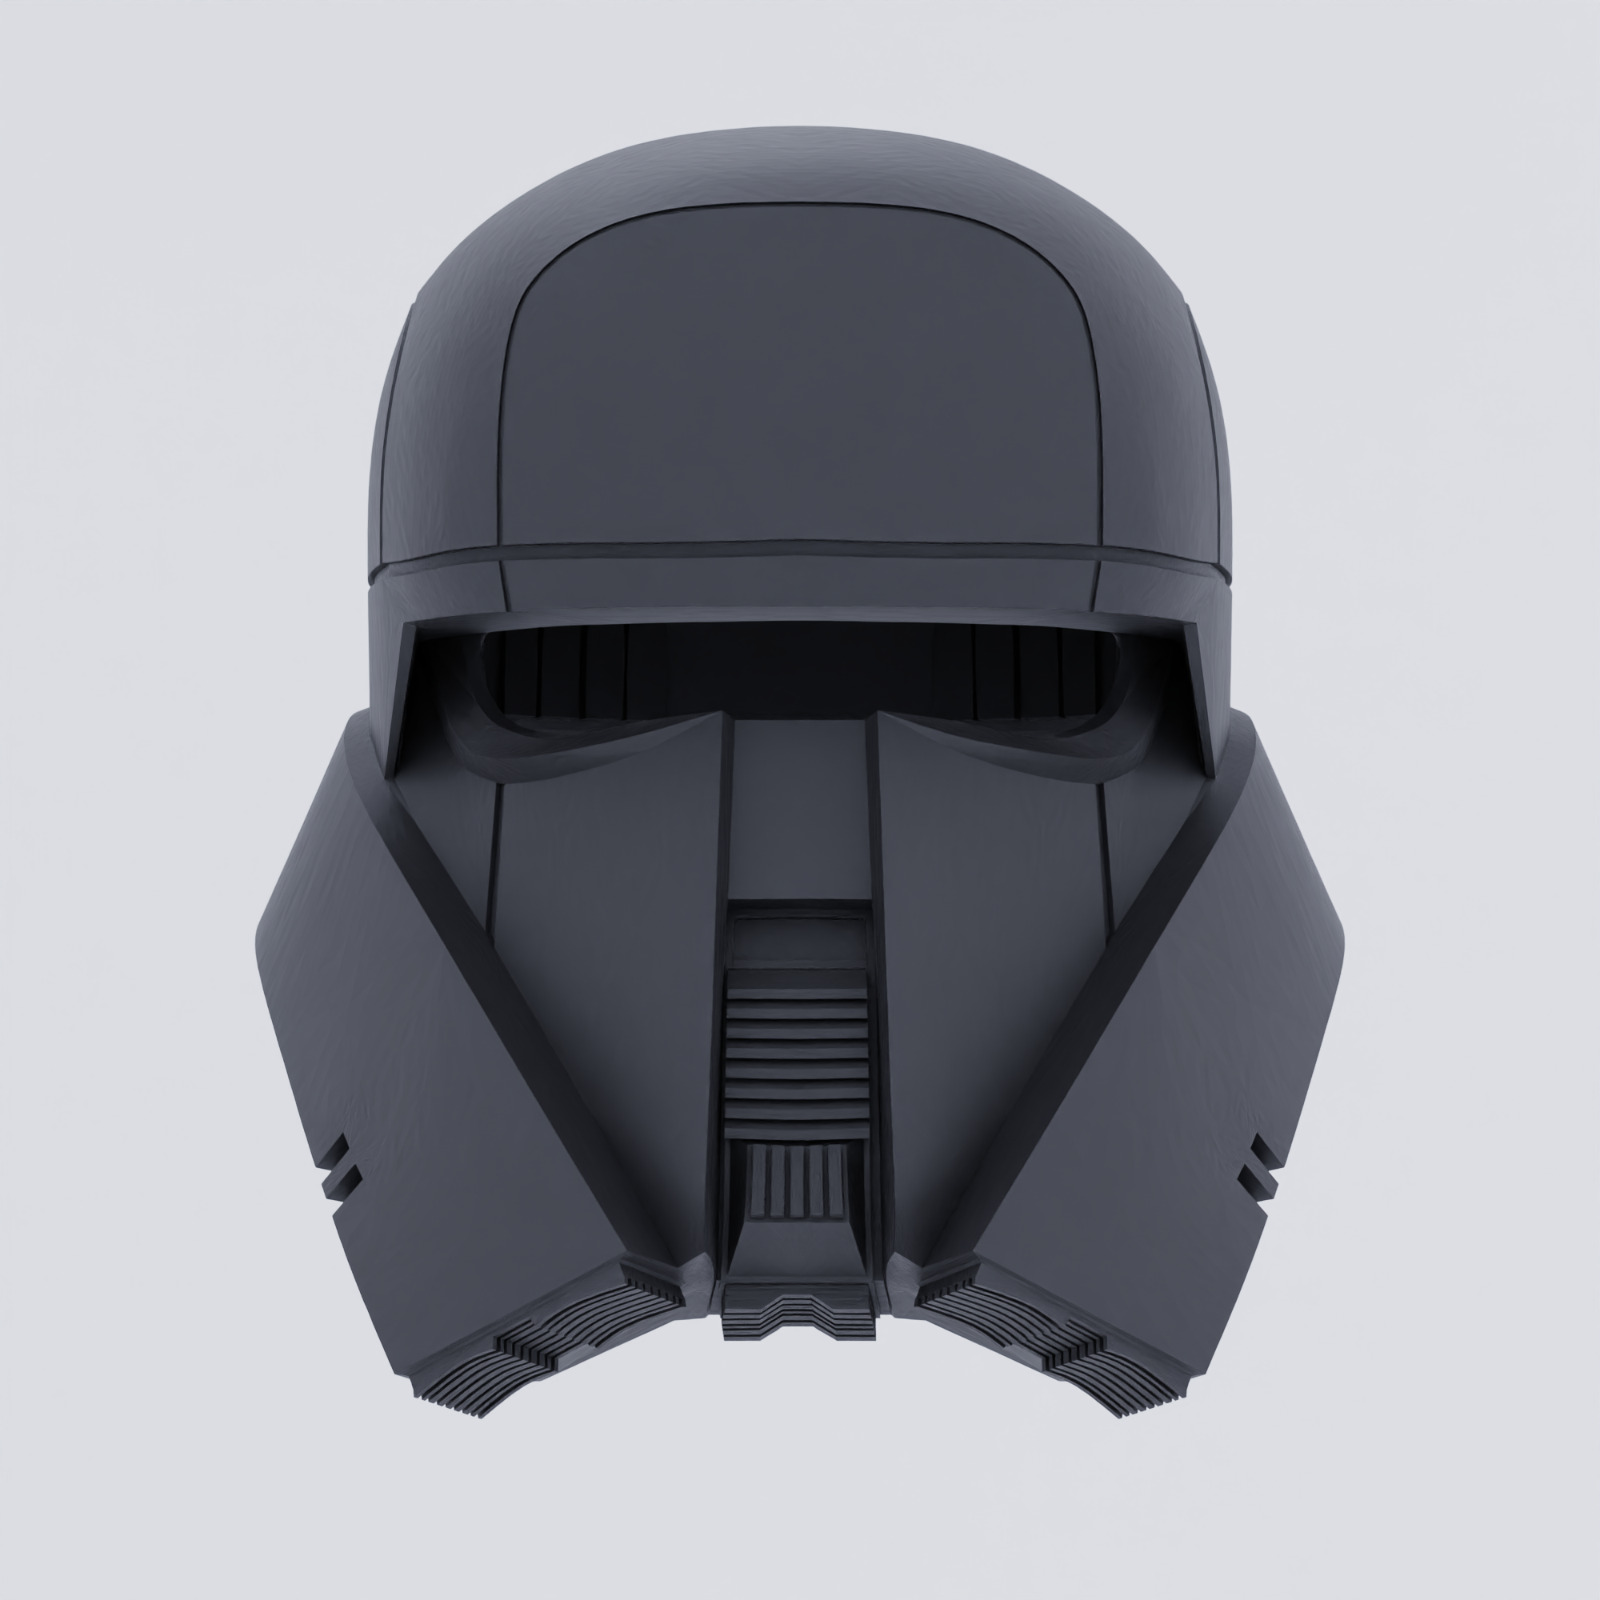 Solo A Star Wars Story Range Trooper 3D Printed Helmet For Cosplay PLA Filament